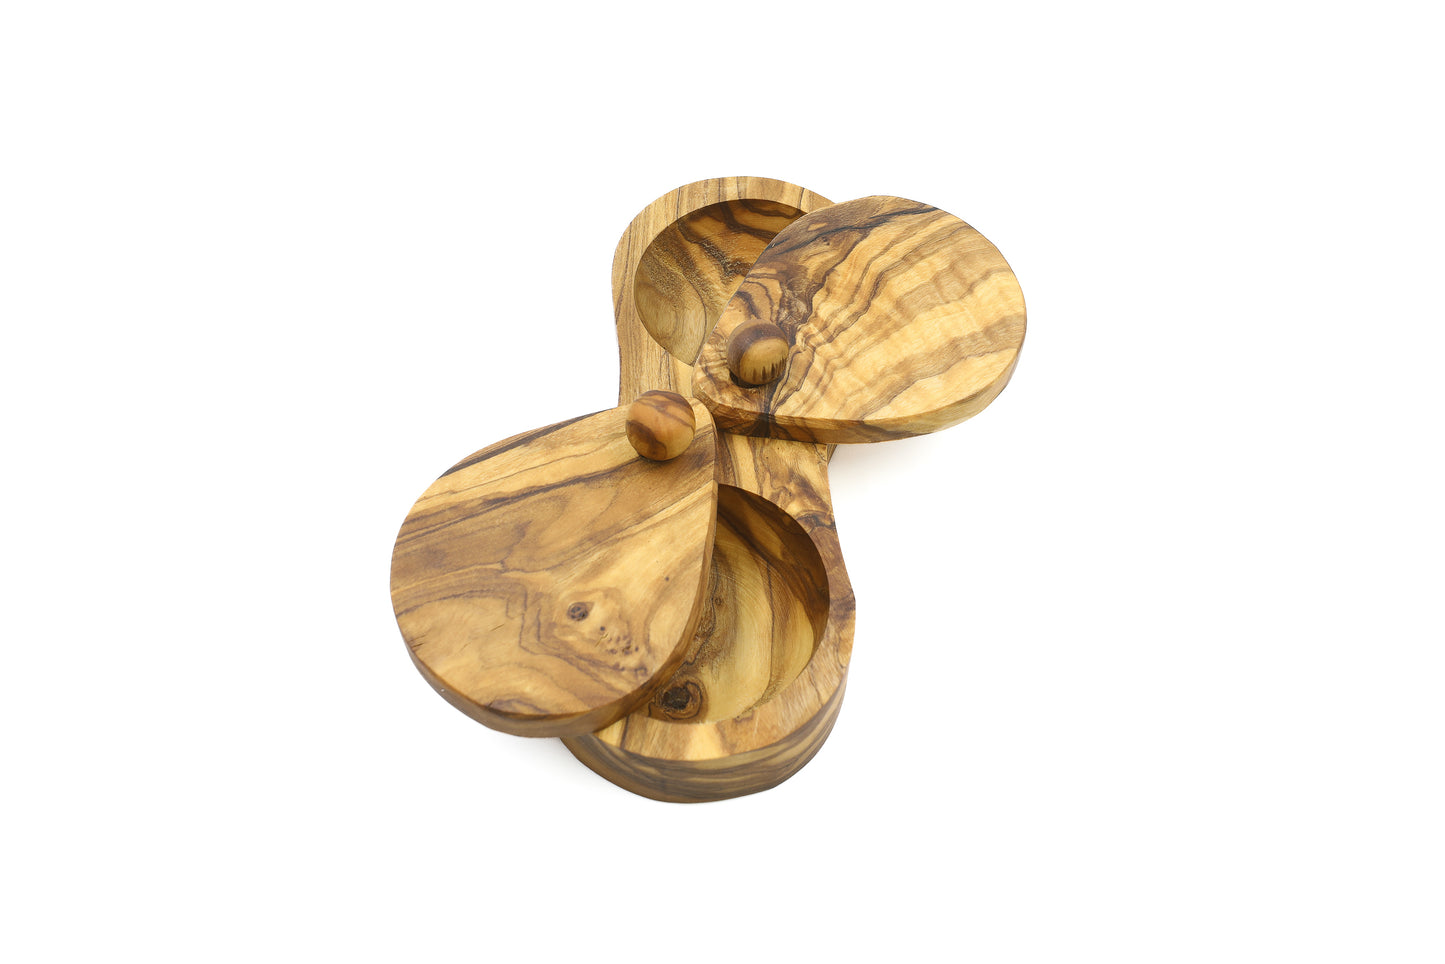 Unique olive wood kitchen accessory for storing salt and spices